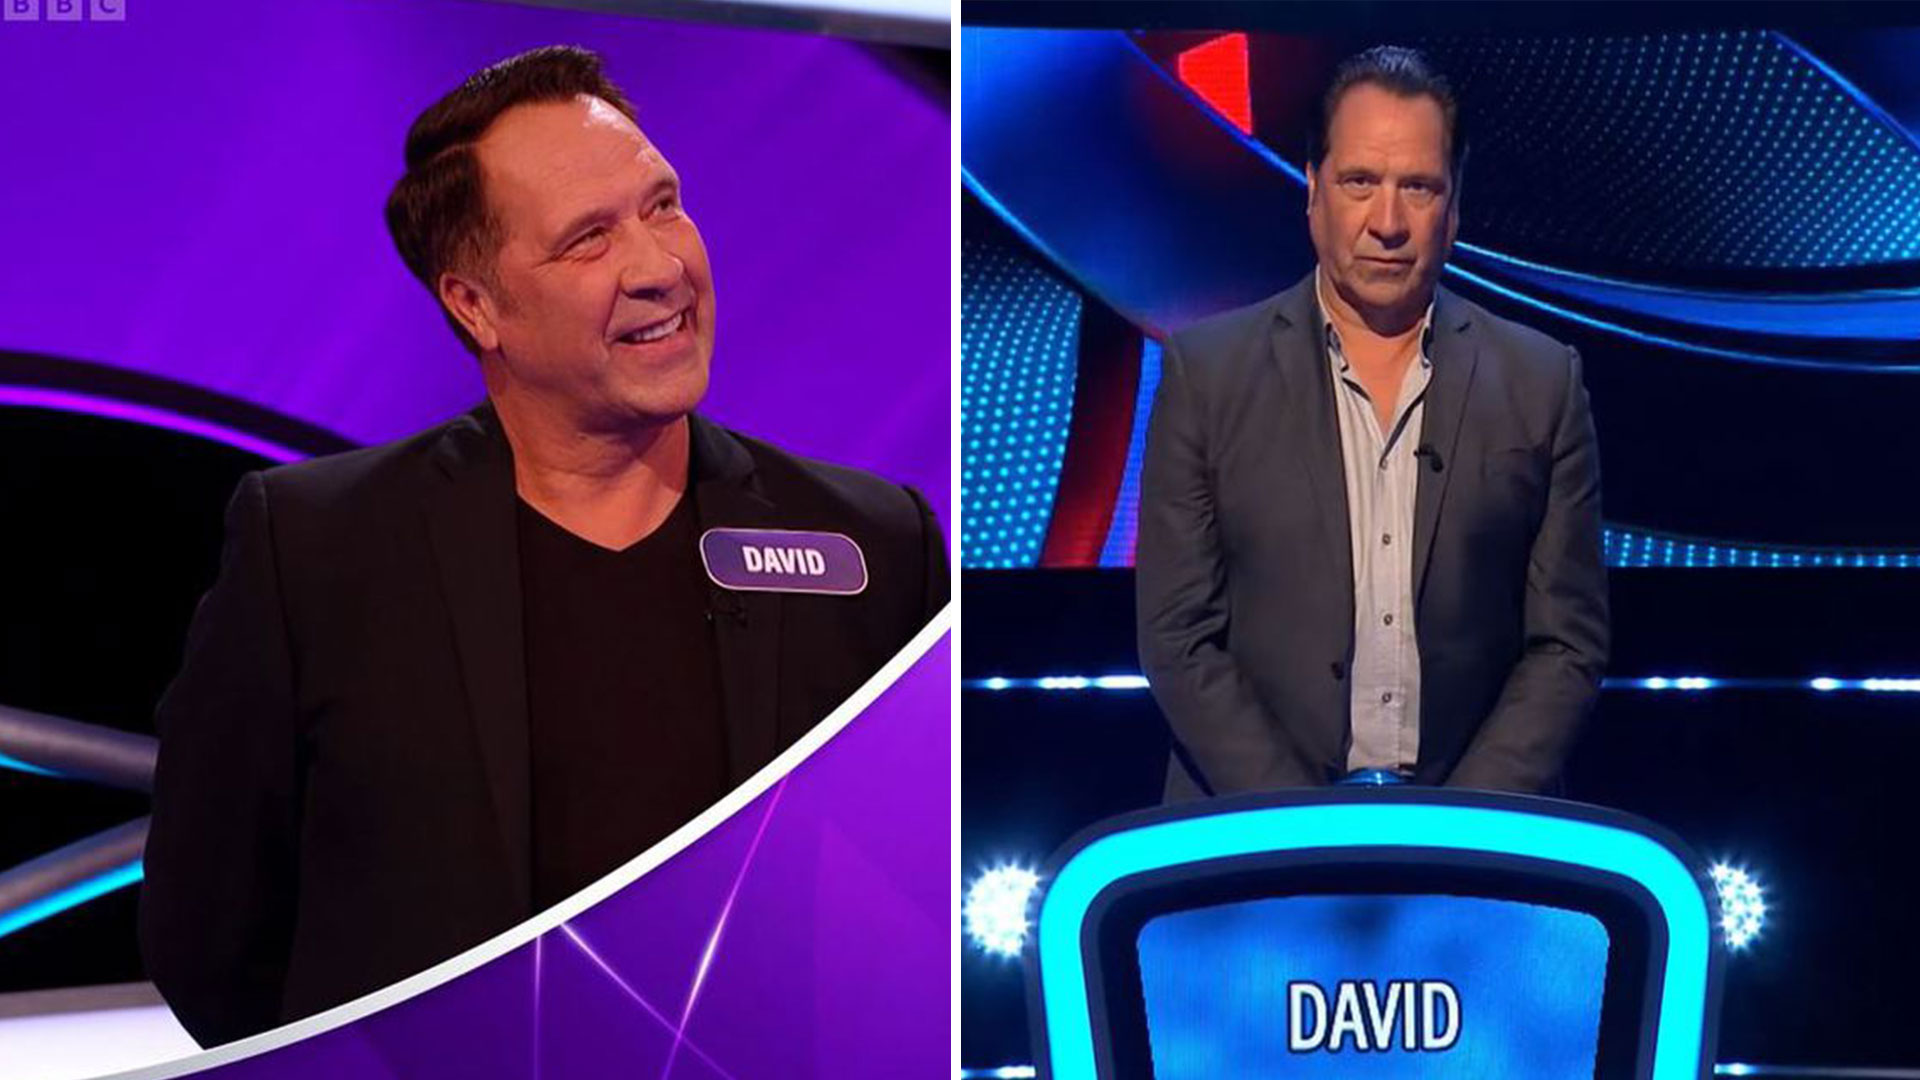 Viewers say ‘licence fee is worth every penny’ as Arsenal icon David Seaman hijacks Saturday night TV in BBC blunder